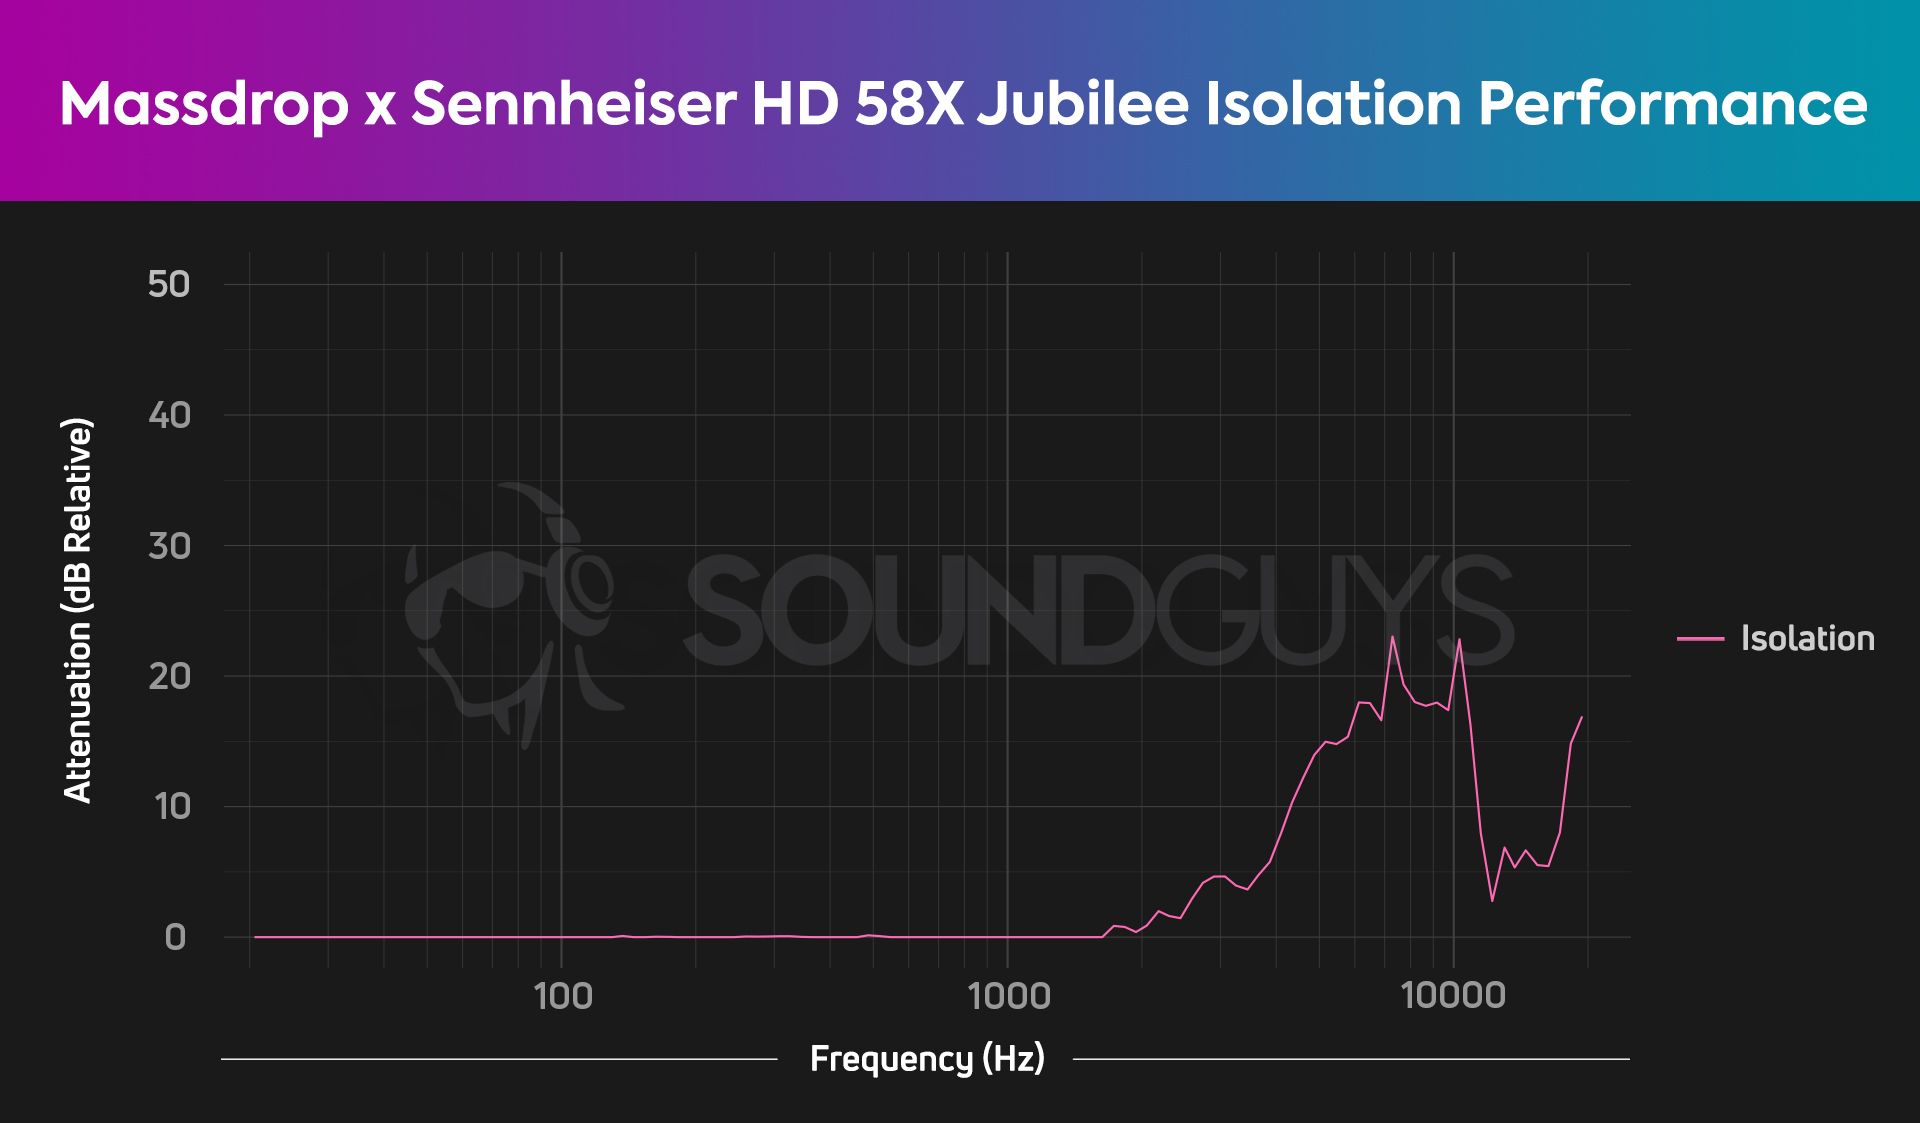 A chart depicts the purposefully poor isolation of the Massdrop x Sennheiser HD 58X Jubilee open-back headphones.